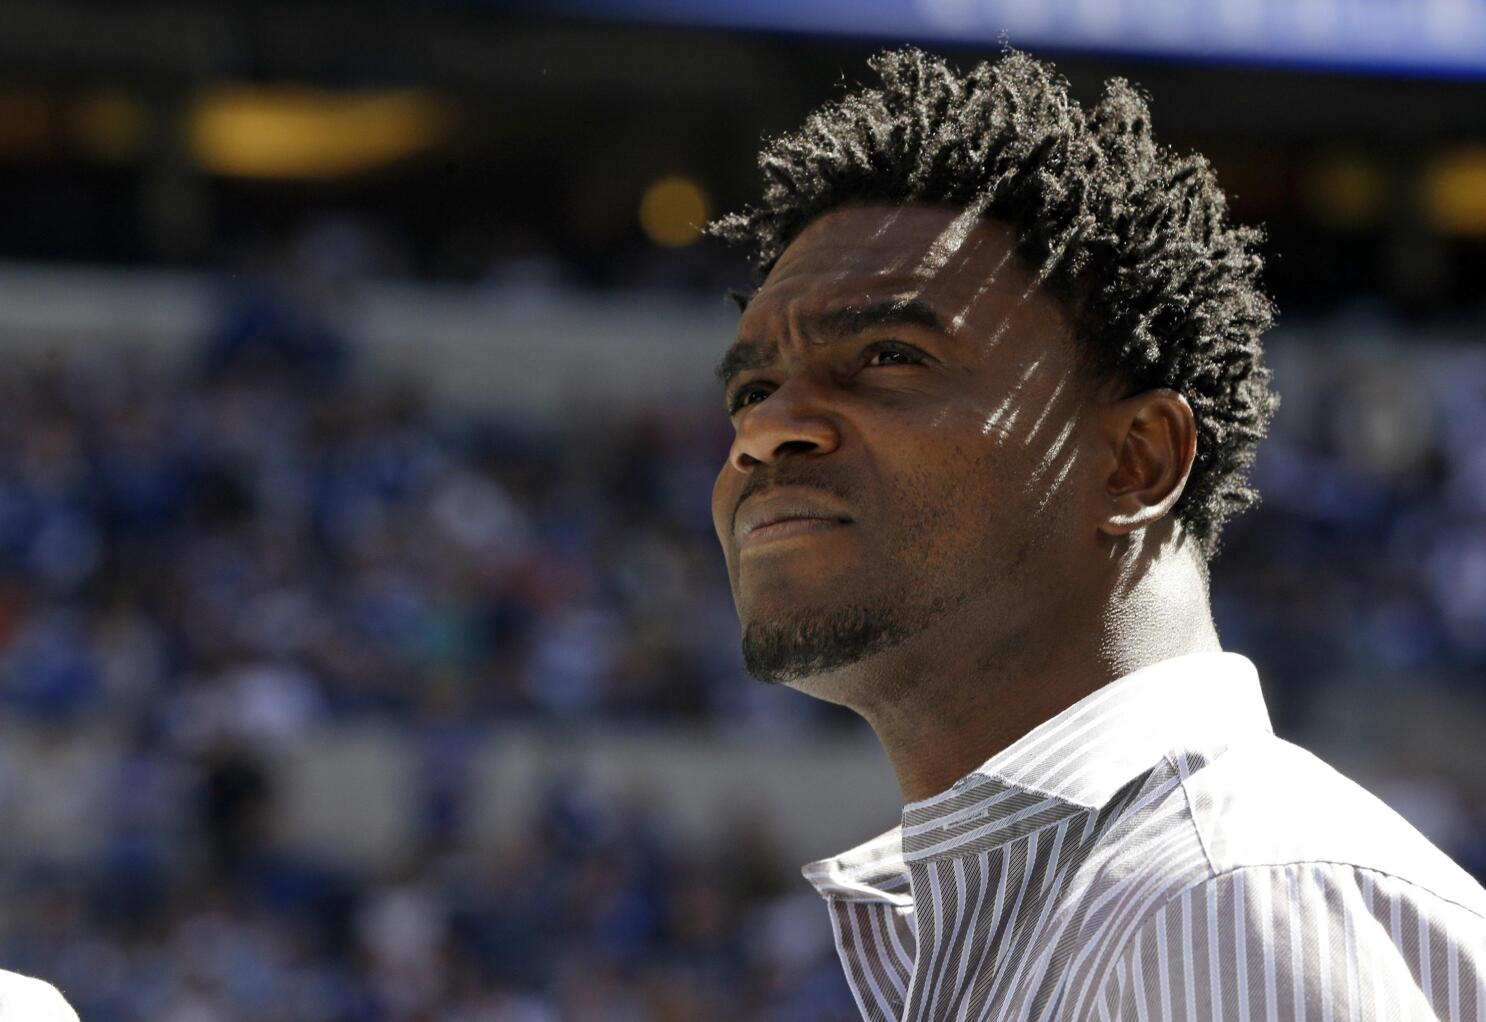 Edgerrin James: From Hall of Fame-worthy running back to doting dad